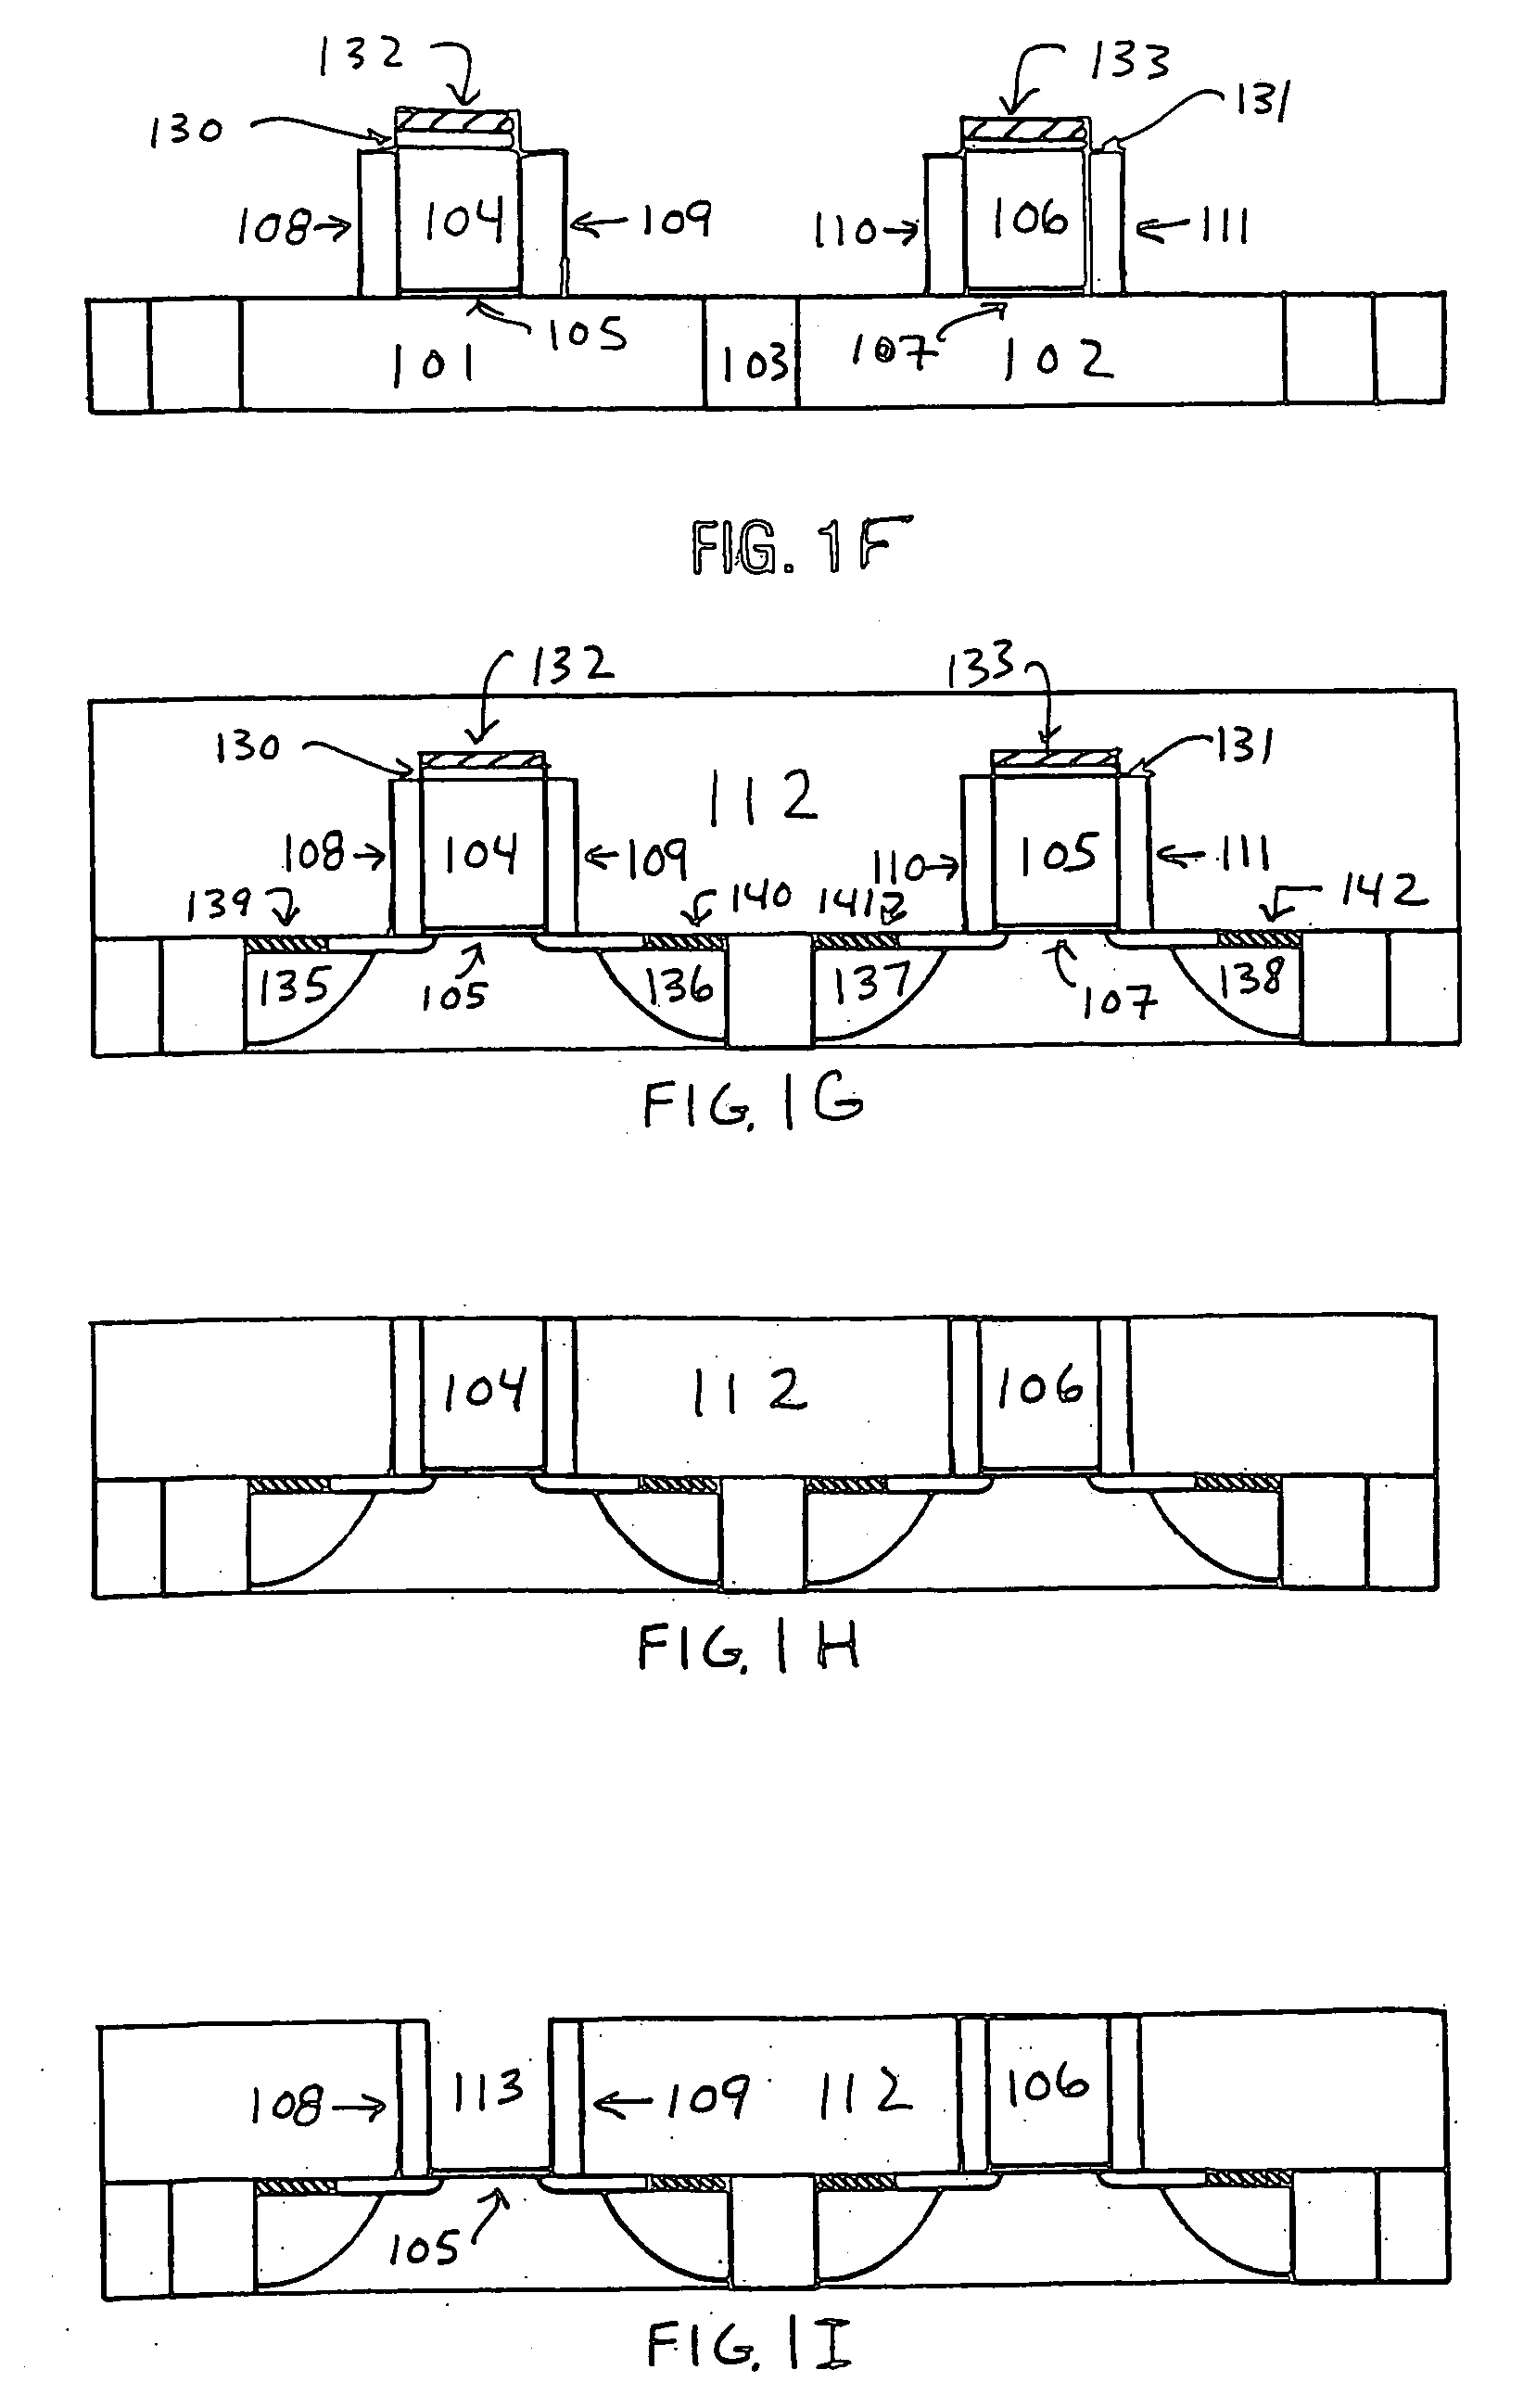 Method for making a semiconductor device with a metal gate electrode that is formed on an annealed high-k gate dielectric layer